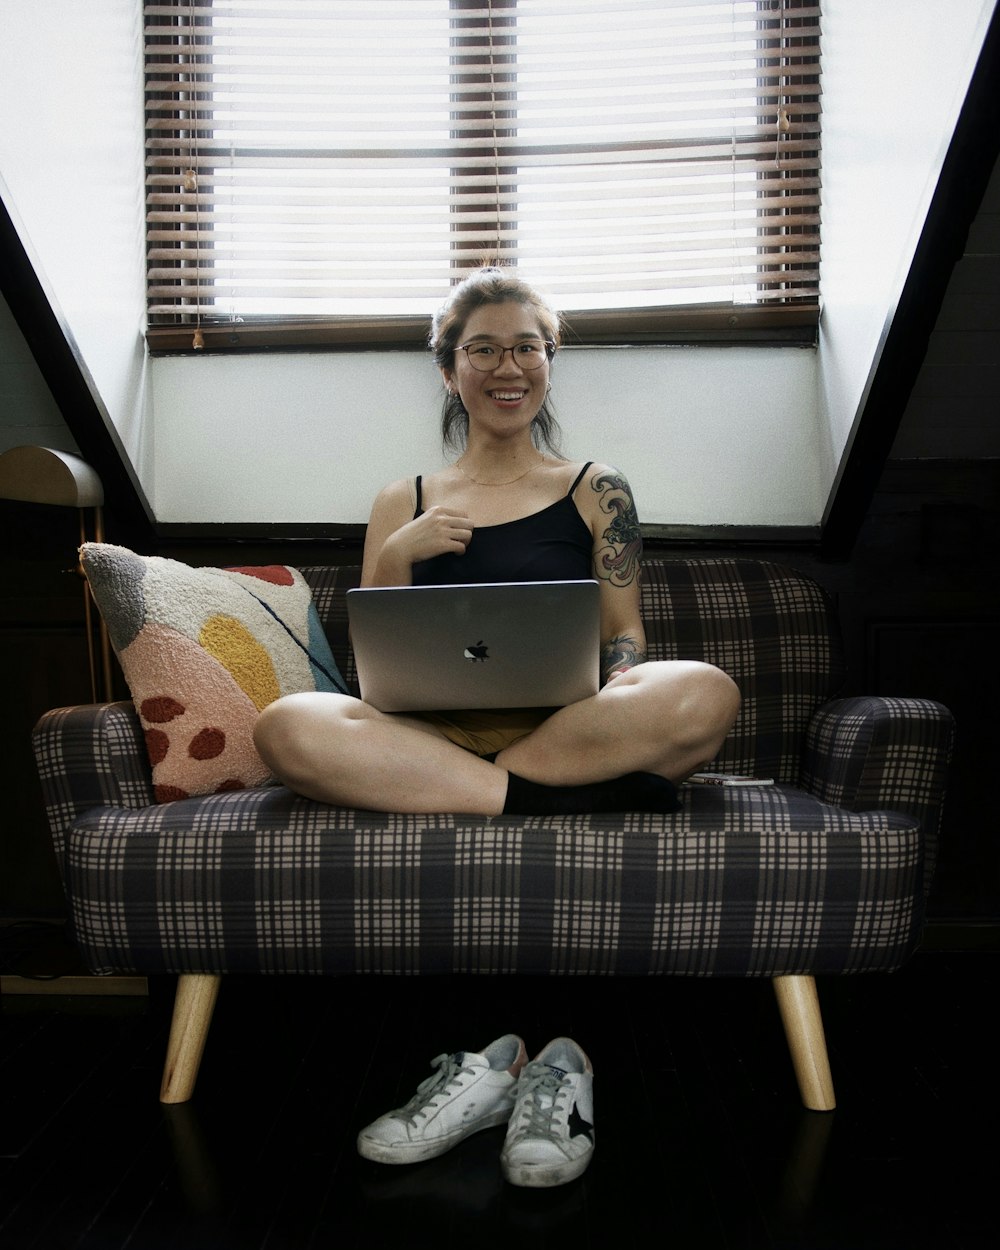 a person sitting on a couch with a laptop